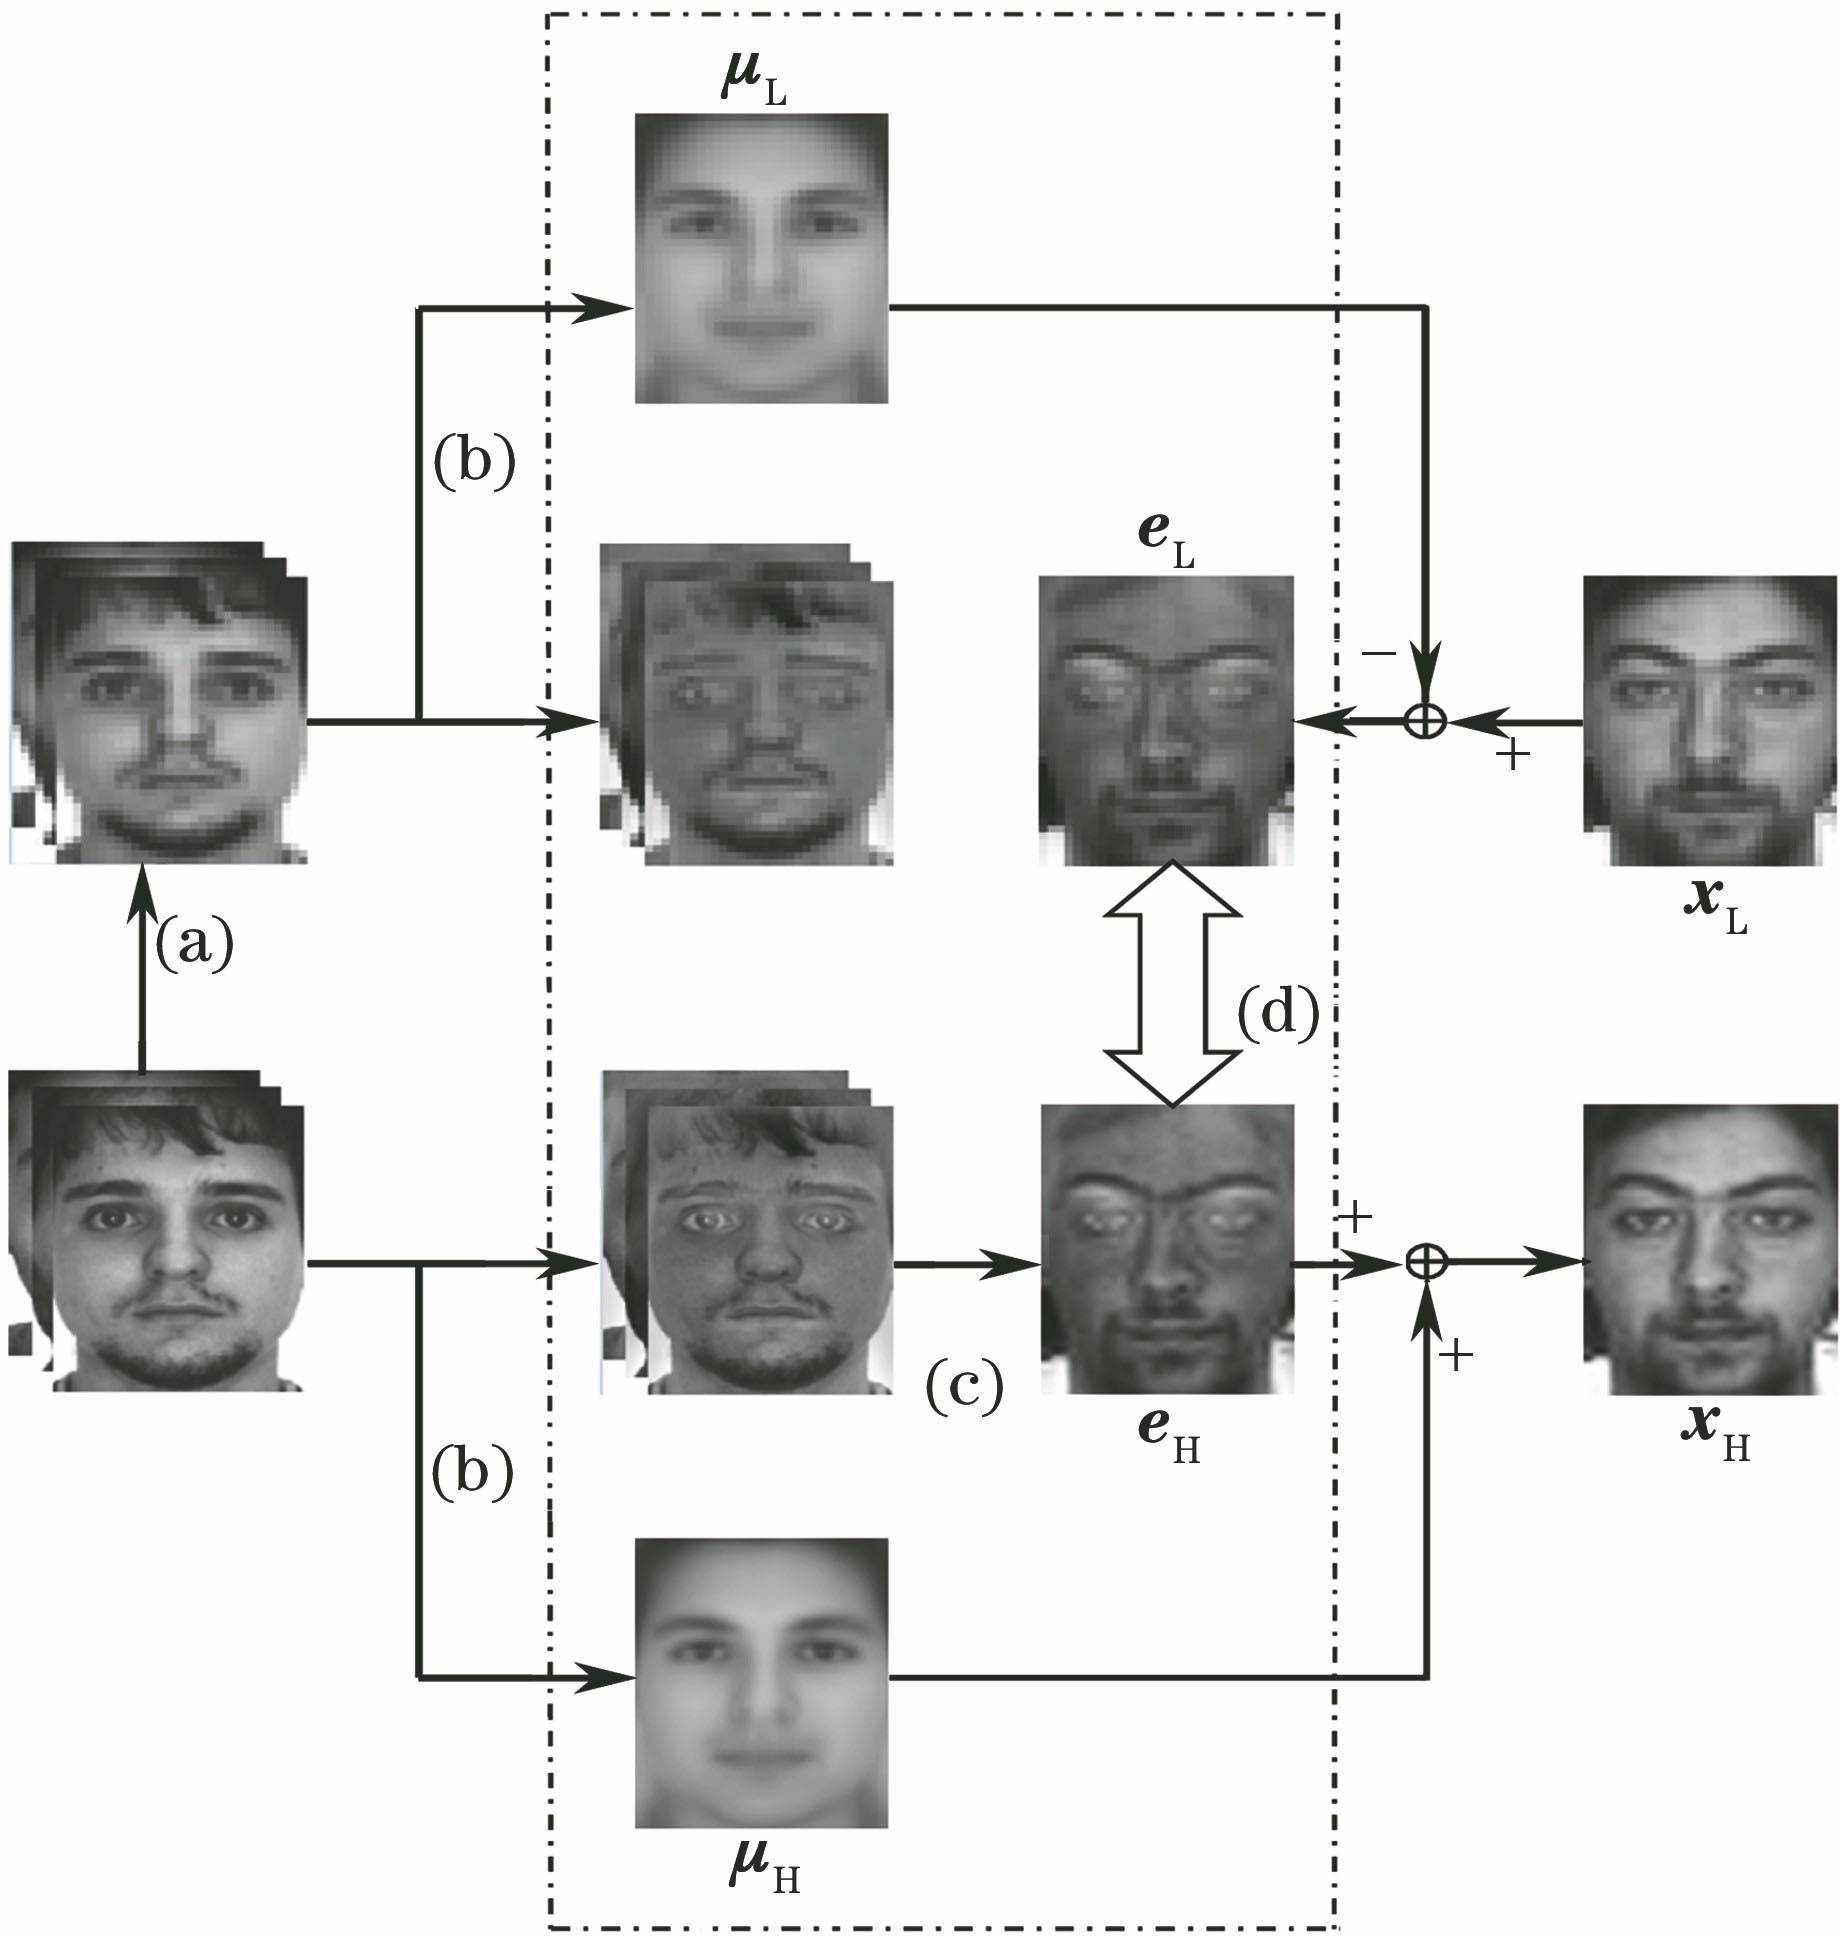 Algorithm framework (a) fuzziness and down sampling; (b) face decomposition based on PCA; (c) MAP reasoning to get the best feature face; (d) constraint enhancement